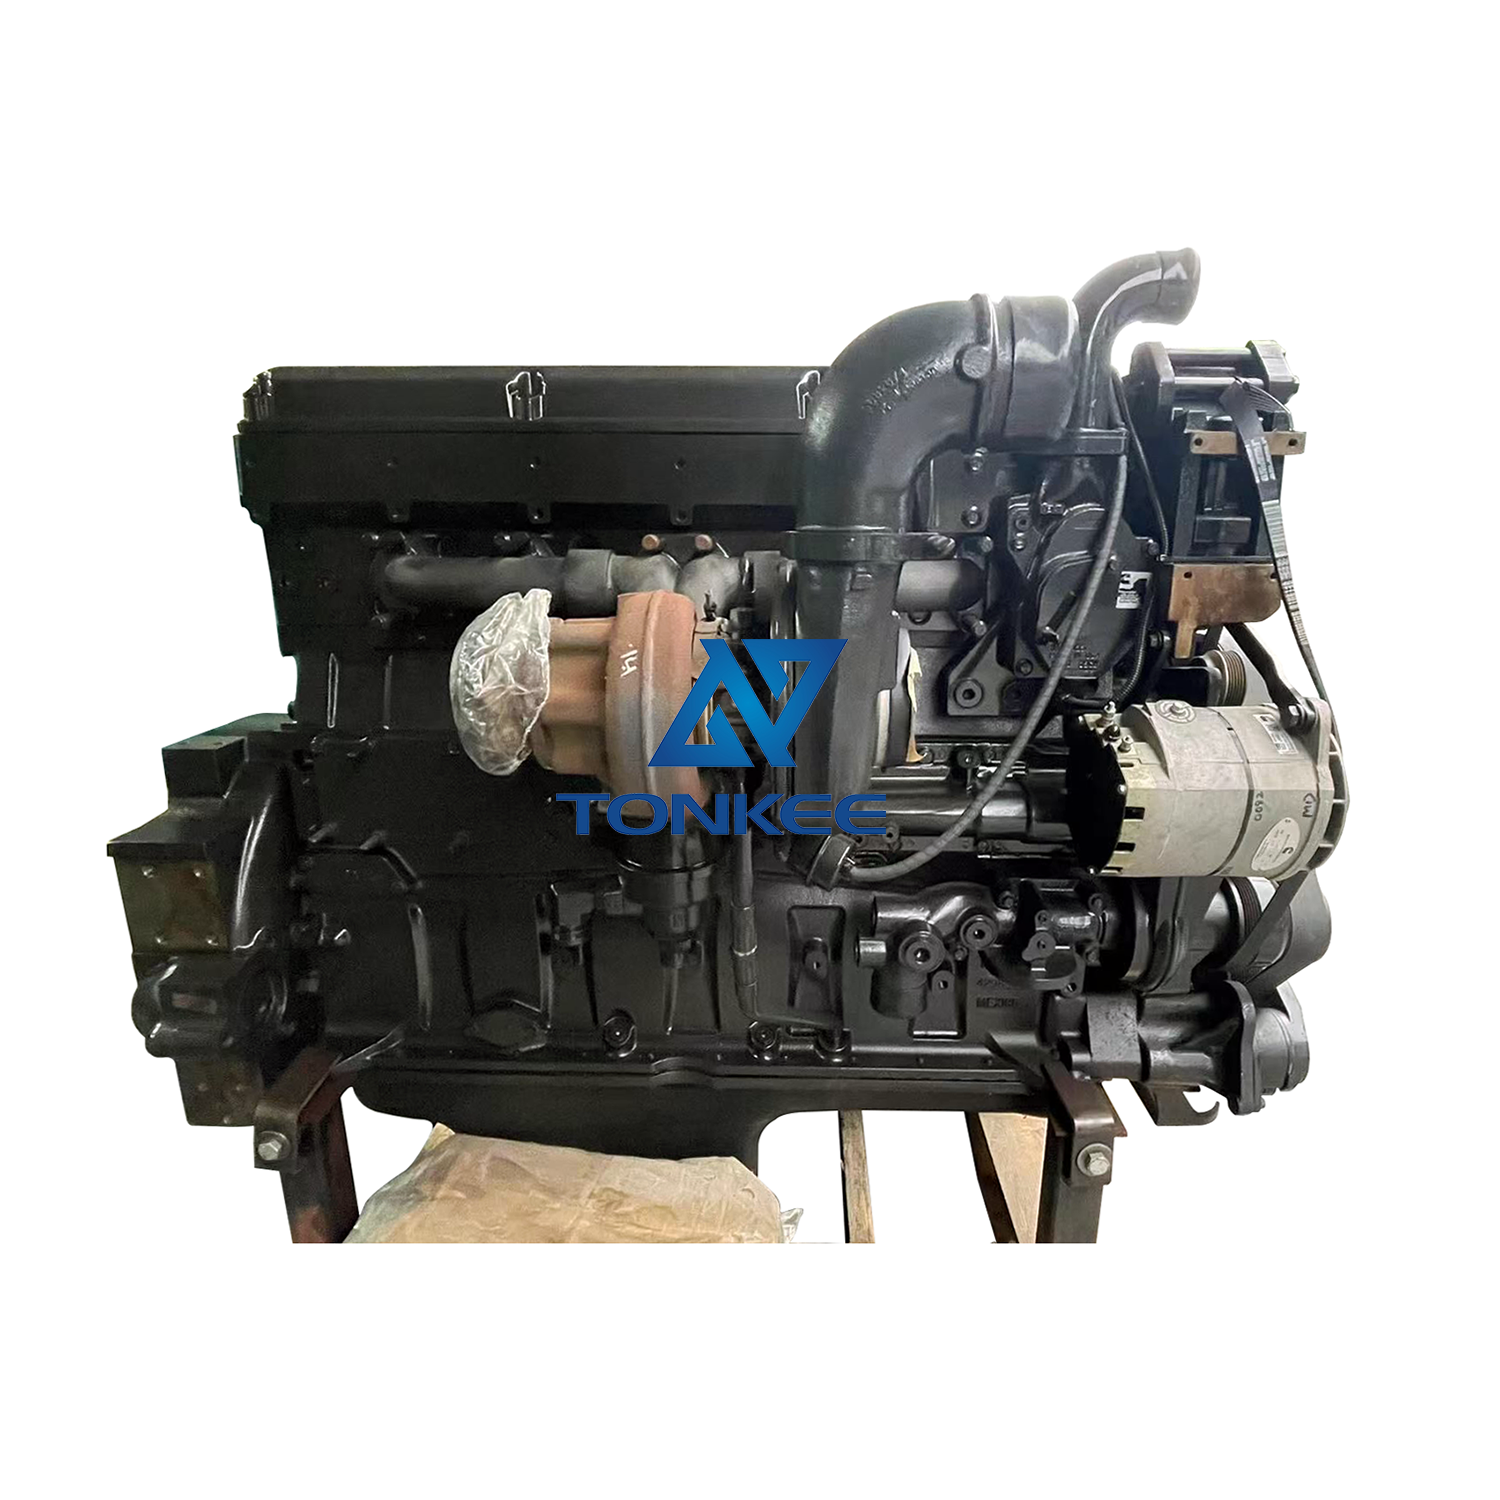 OEM QSX15 530HP 395KW 1800 RPM 2869367 XE900C XE900D Excavator diesel engine assembly fit XCMG